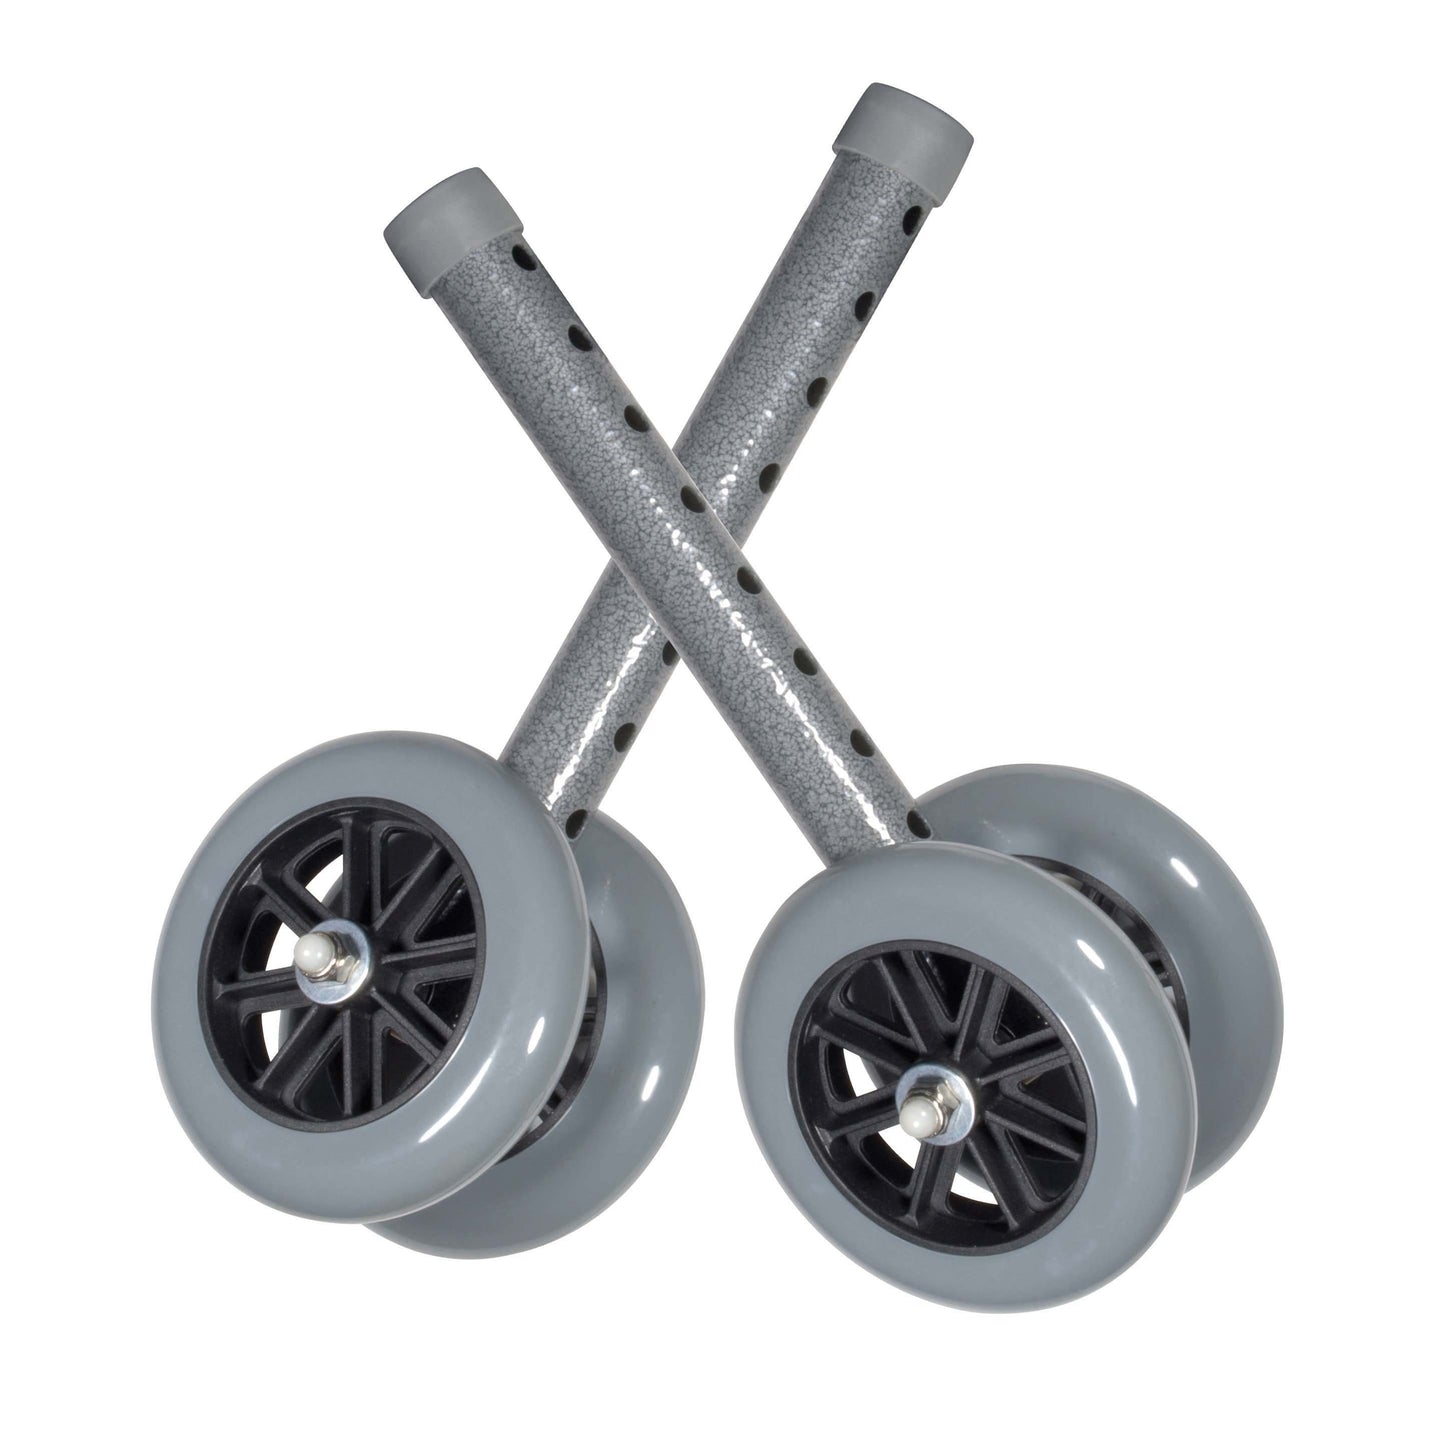 Drive 5" Bariatric Walker Wheels with Two Sets of Rear Glides, 10118SV